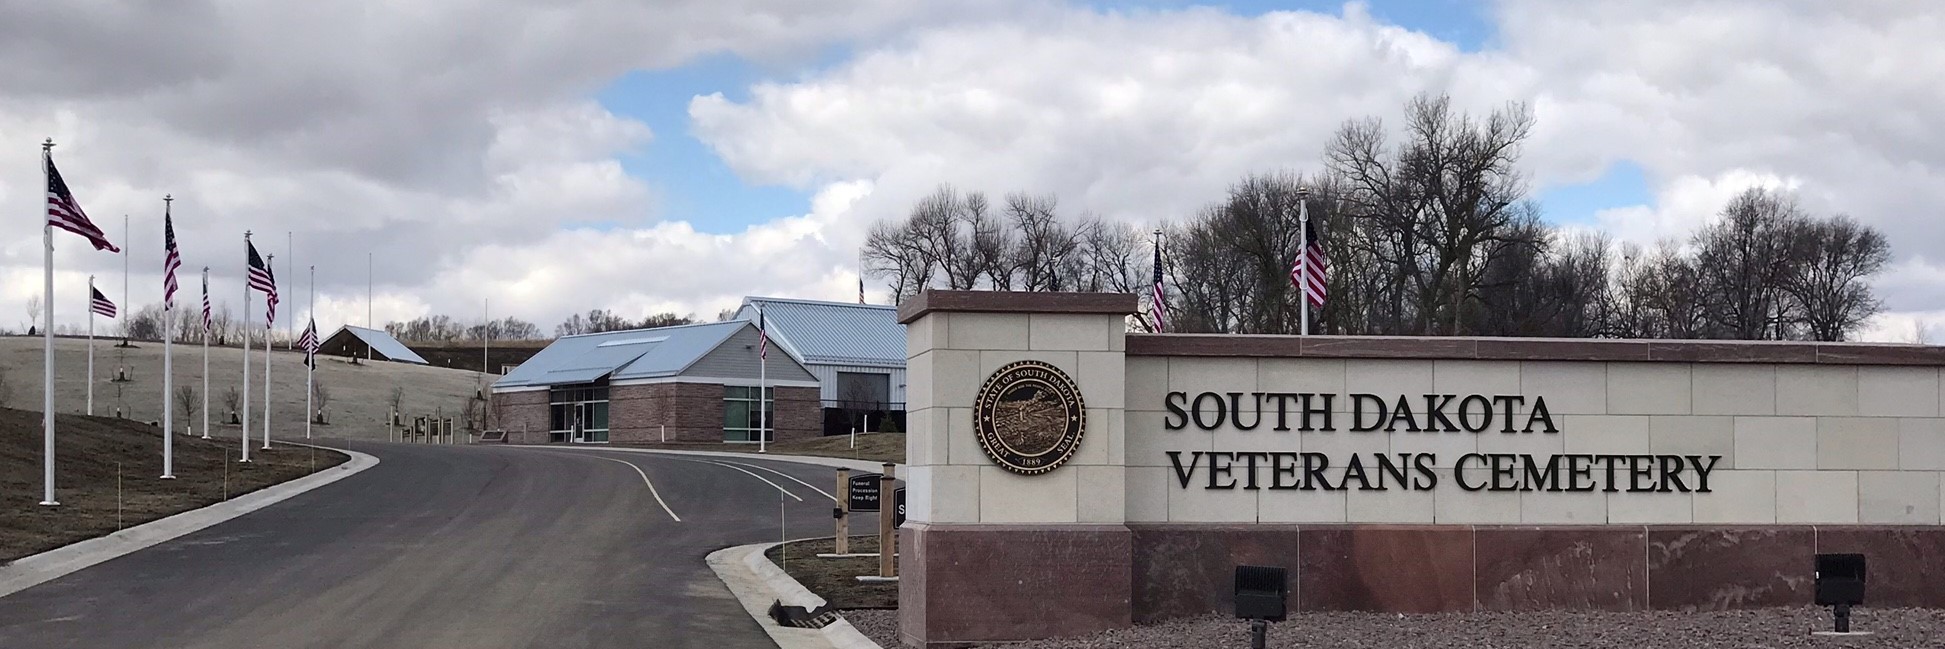 SD State Veterans Cemetery - Entrance Signage